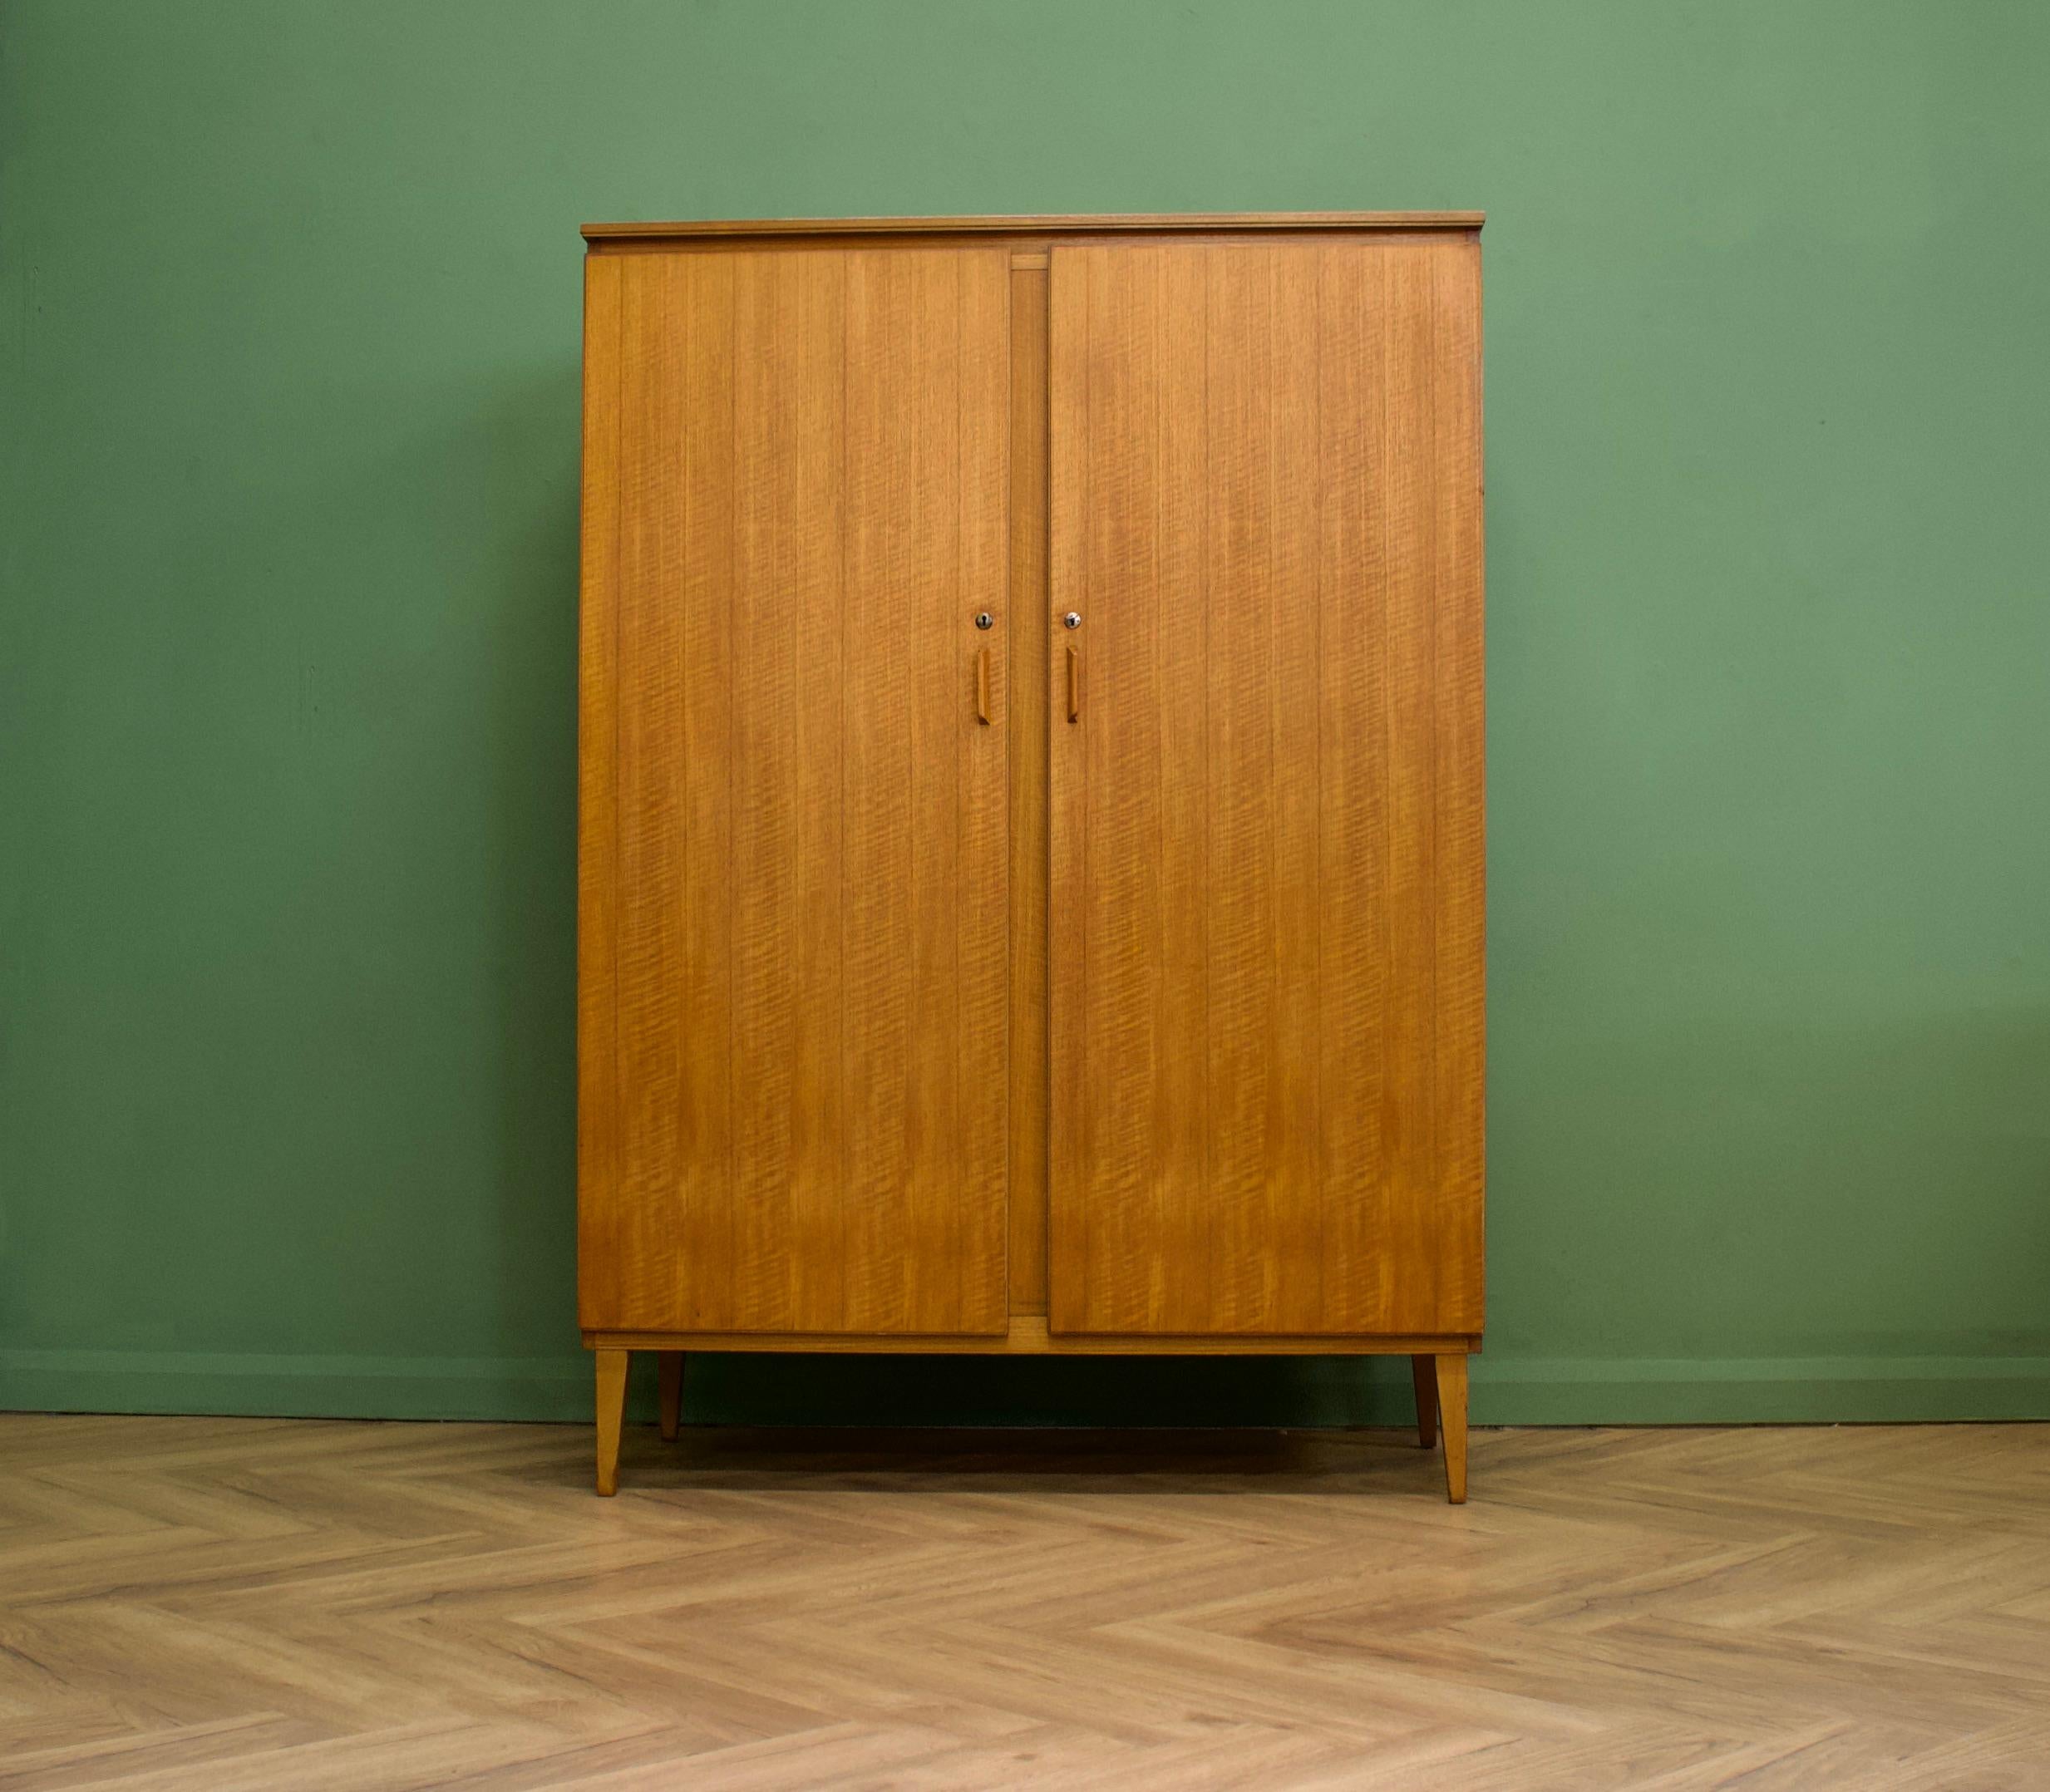 A walnut freestanding wardrobe by Alfred Cox - these pieces were usually retailed through Heals department store during the 1950s and 1960s
Internally there are two hanging rails and a shelf
The attractive legs are slightly tapered and splayed and